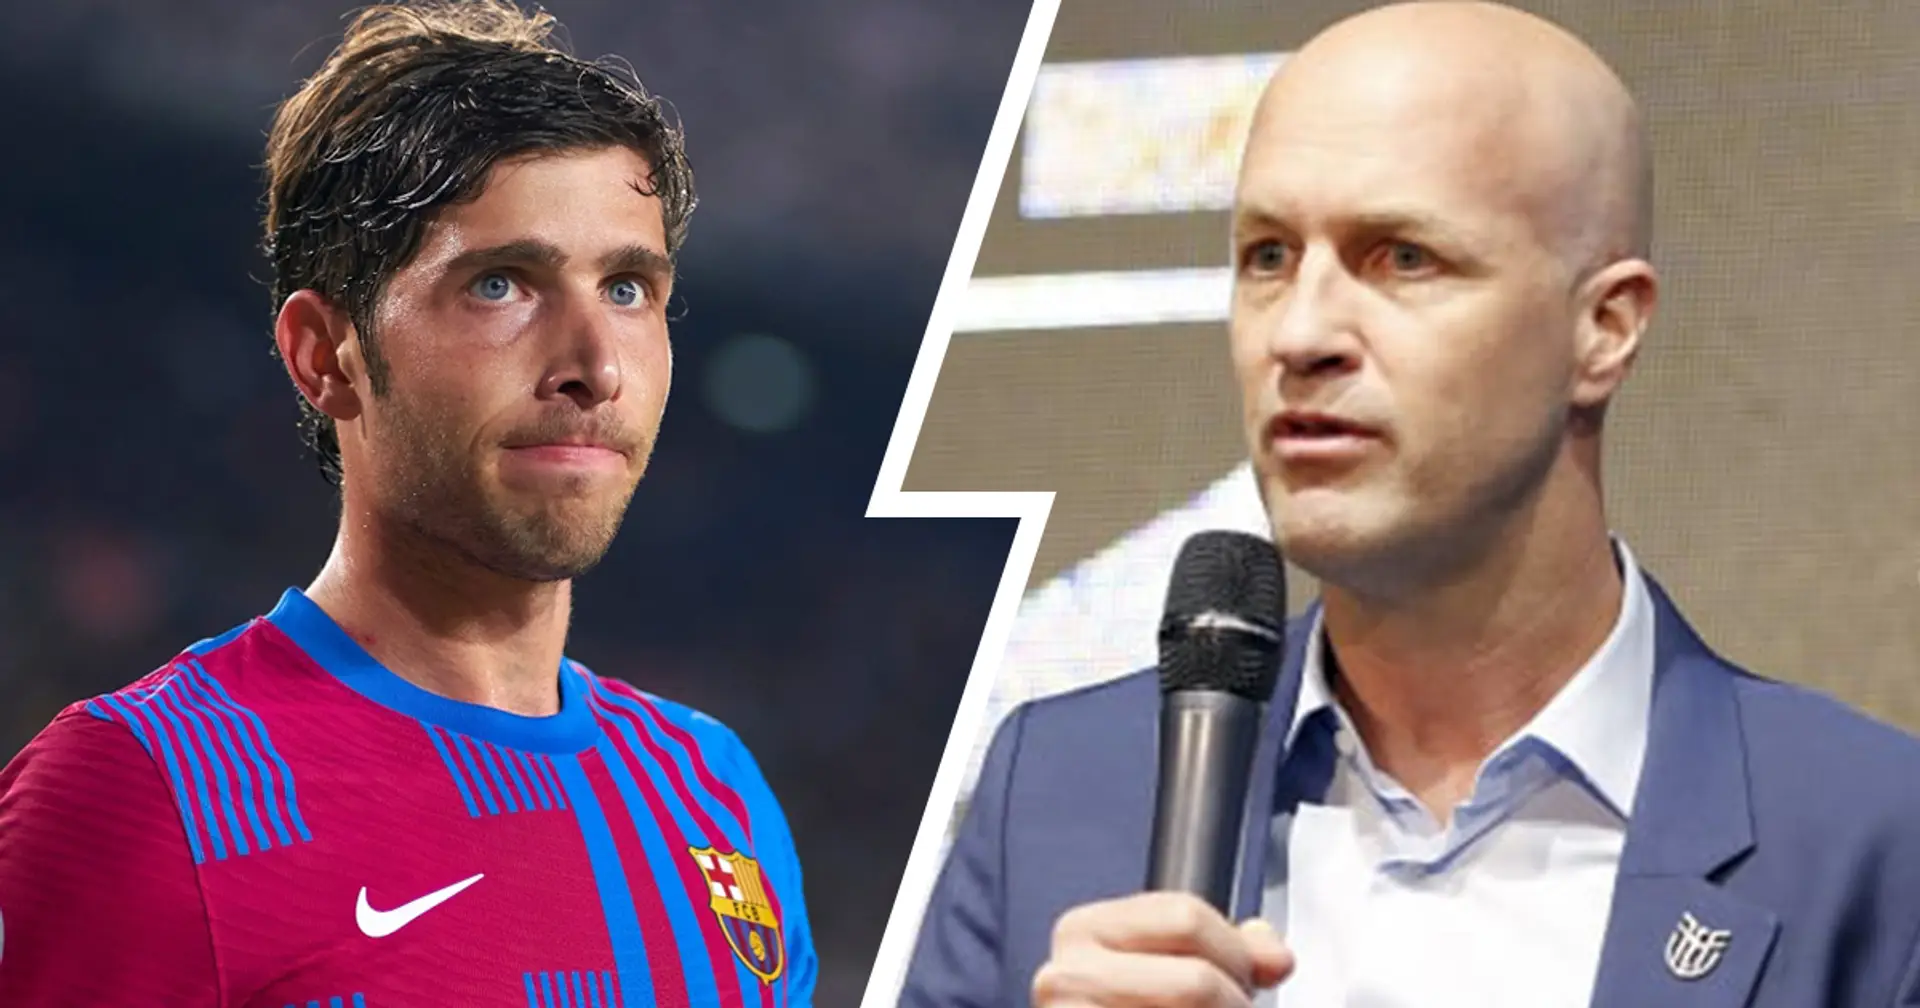 Sergi Roberto closer to leaving Barca and 3 more under-radar stories of the day